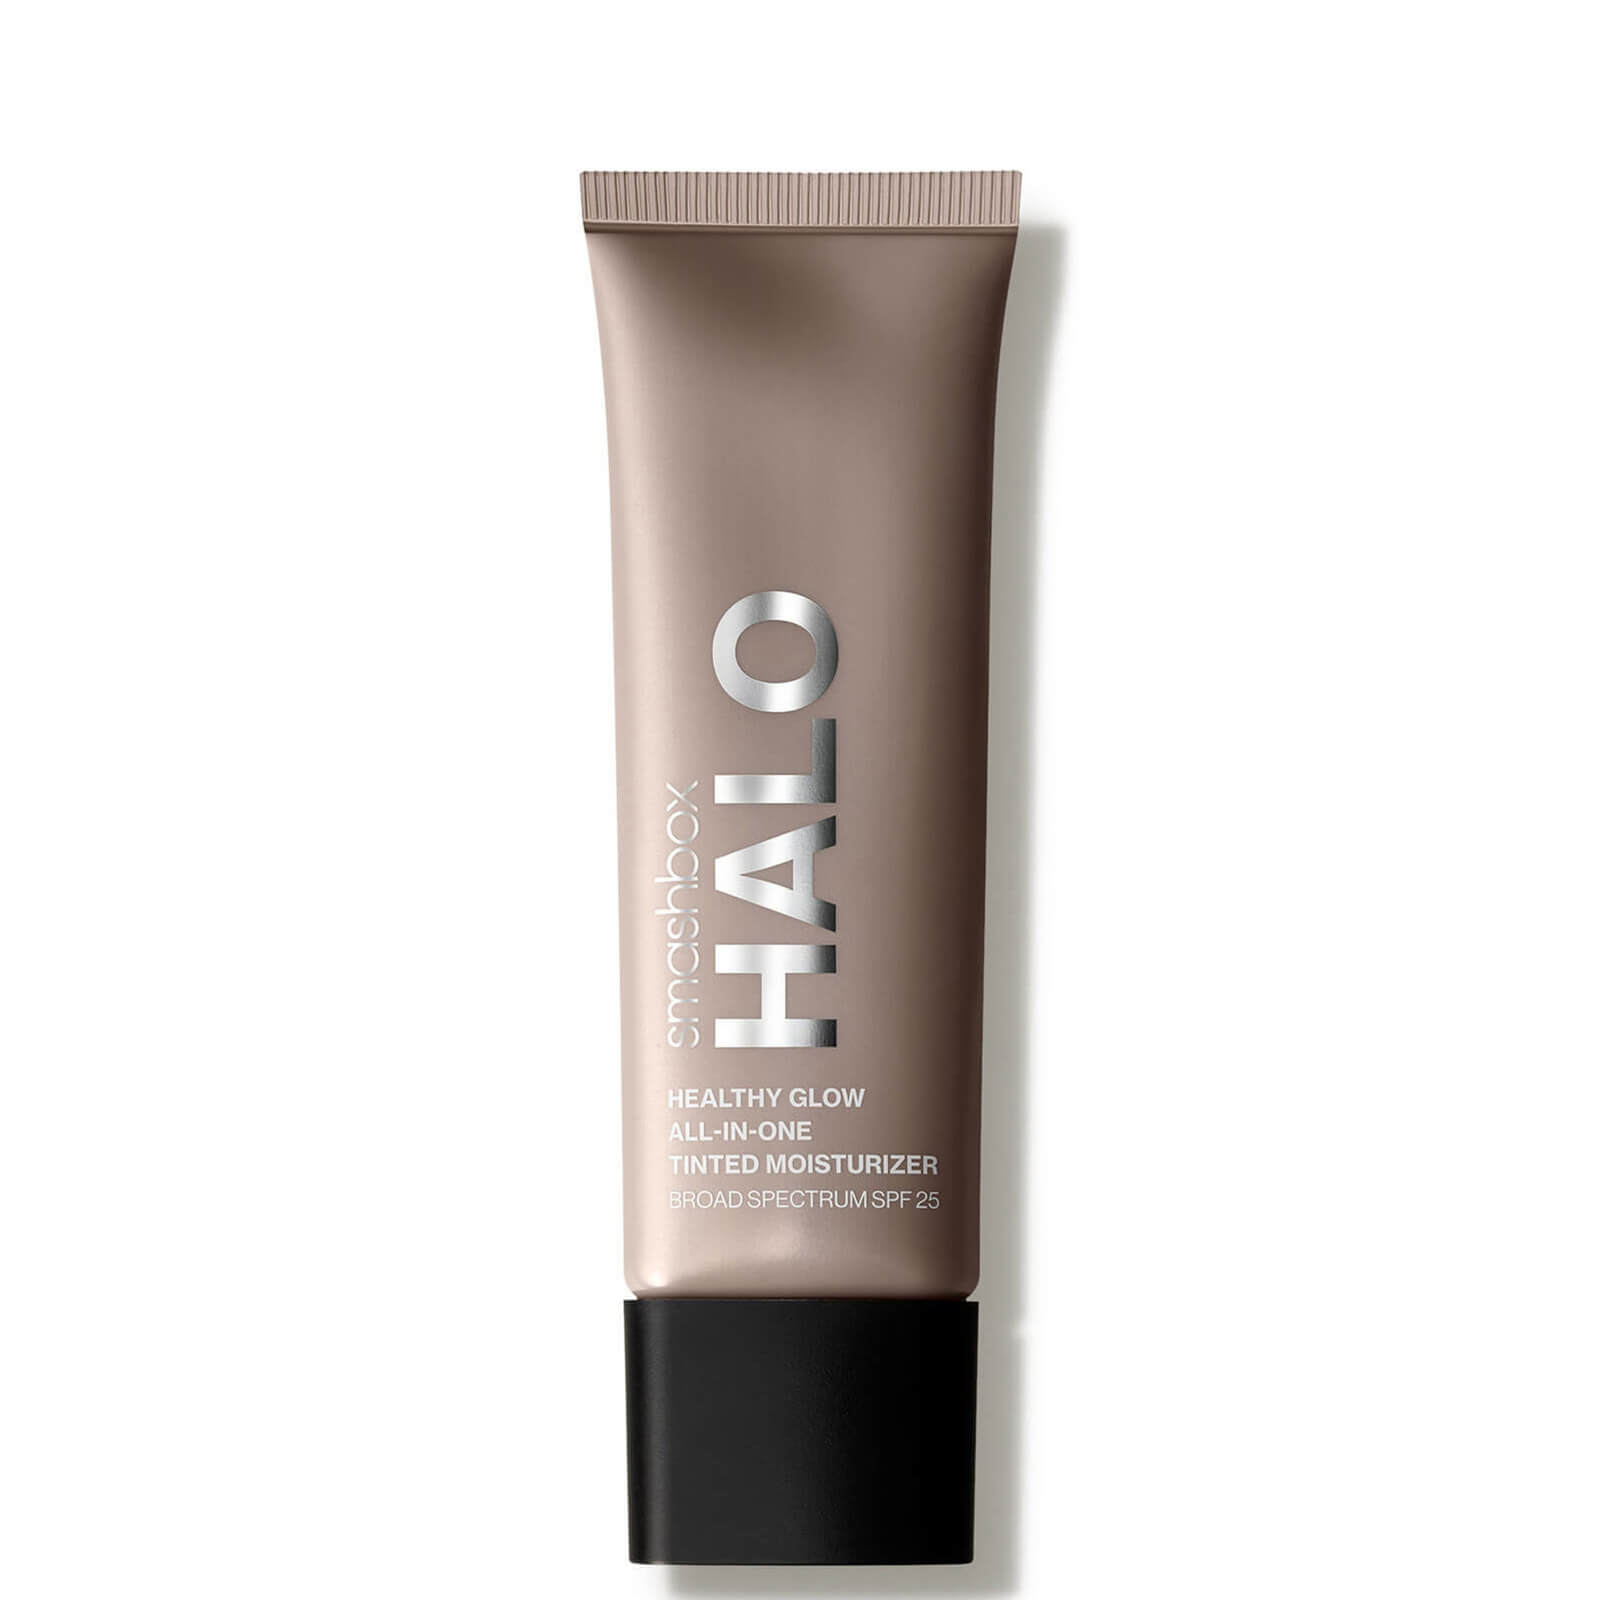 Image of Smashbox Halo Healthy Glow All-in-One SPF25 Tinted Moisturiser 40ml (Various Shades) - Tan